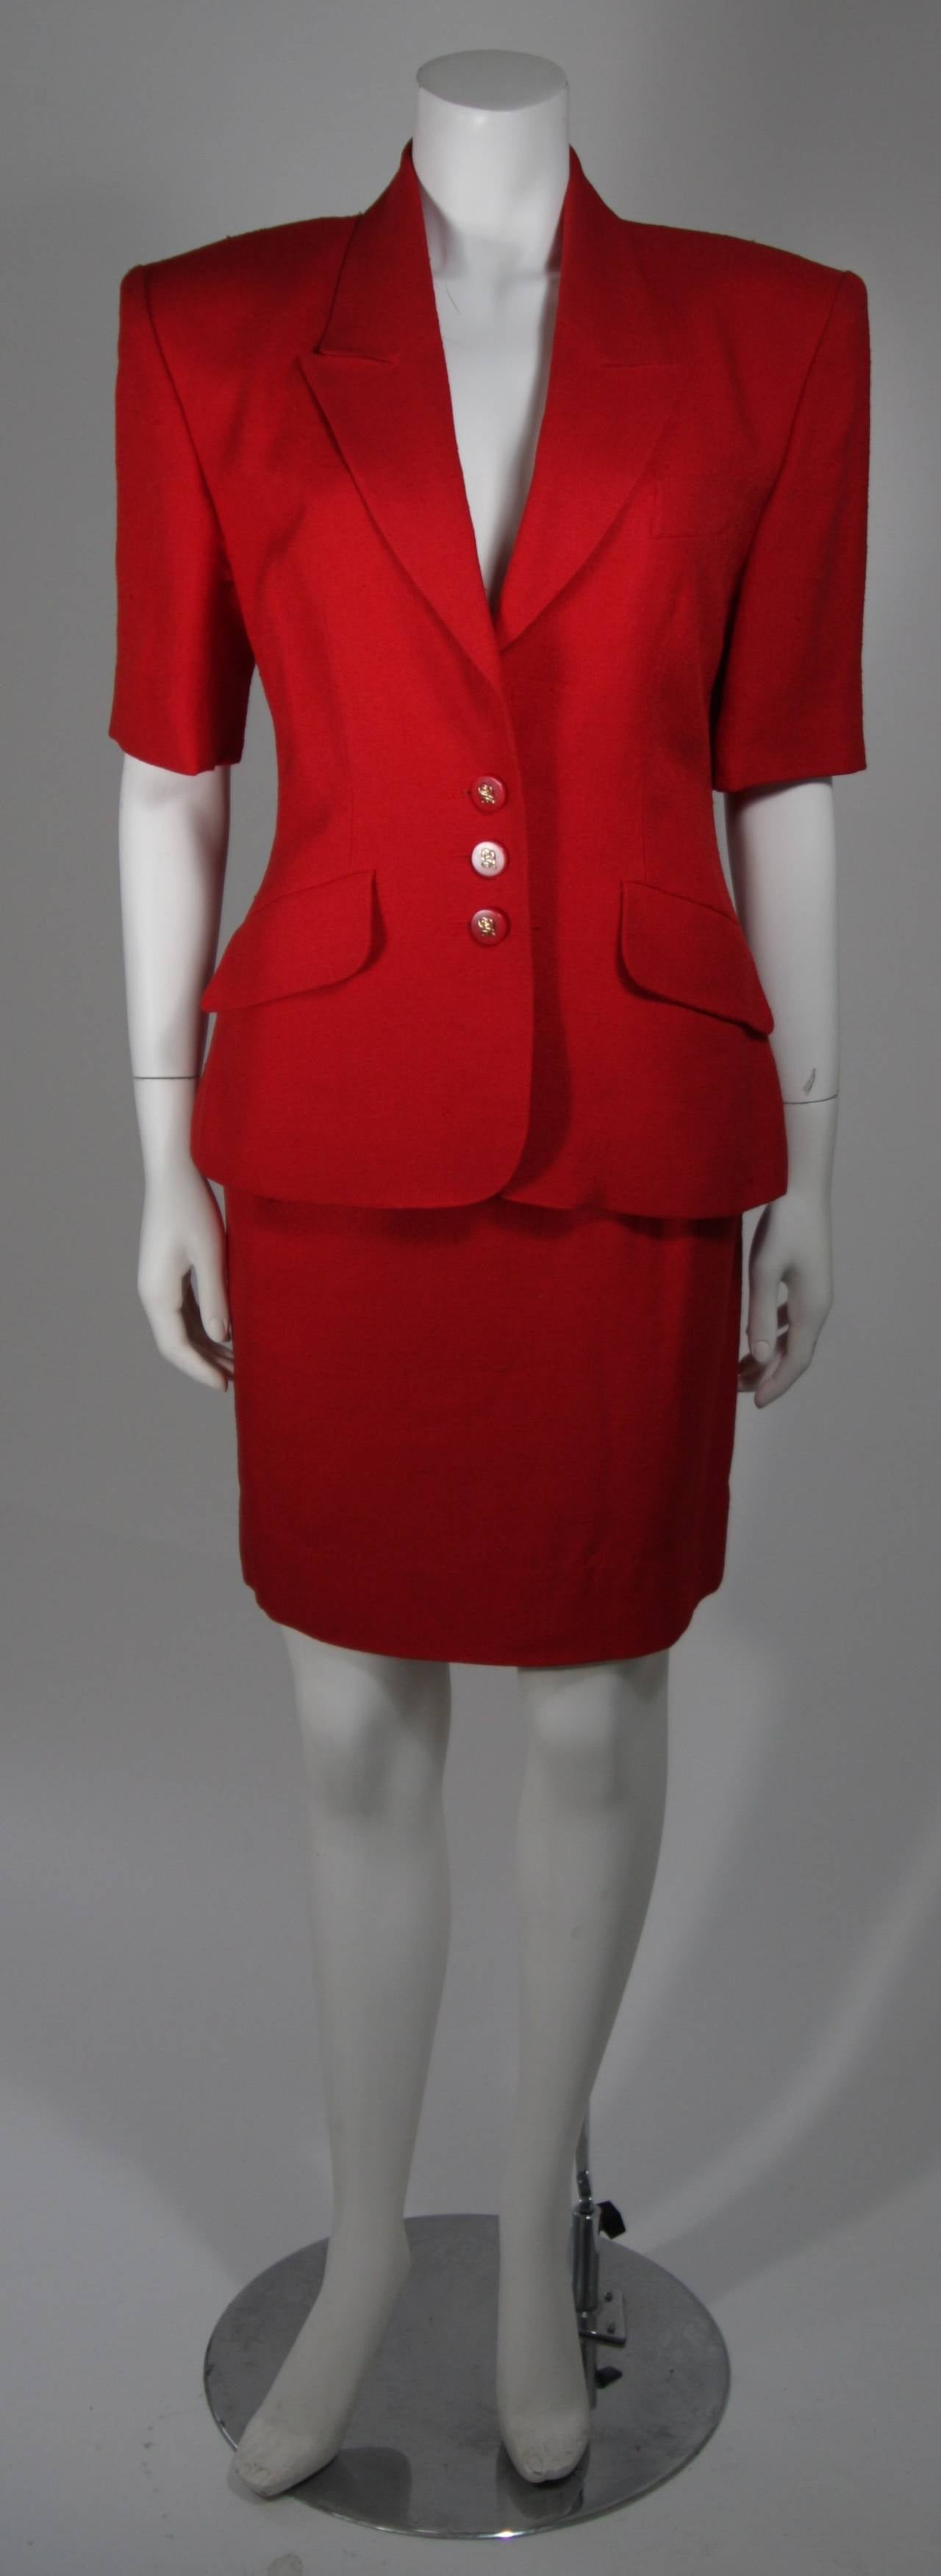 This Hermes Two Piece short sleeve red classically styled jacket with working angled flap pockets, three red buttons at waist and on the sleeve backs with golden H details. 
The skirt features a fitted waistband with pleat front, a red metal side